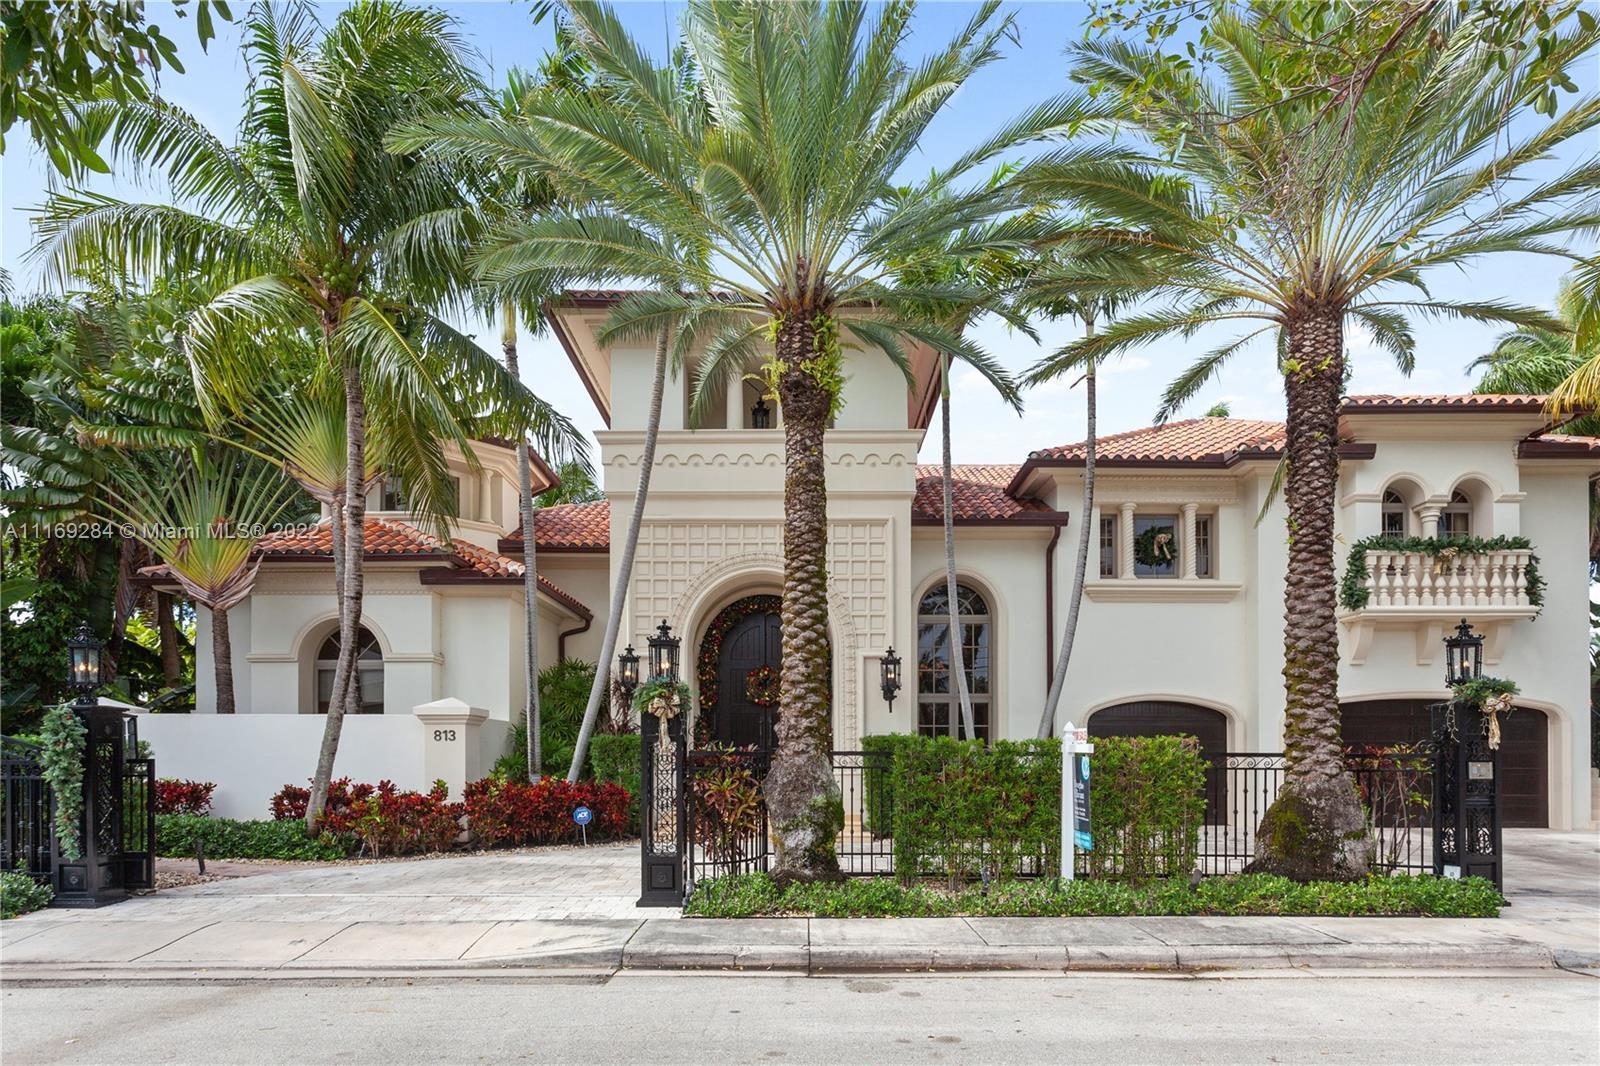 Spectacular Las Olas Mediterranean Estate with 100' of deep water frontage.  Dock accommodates up to